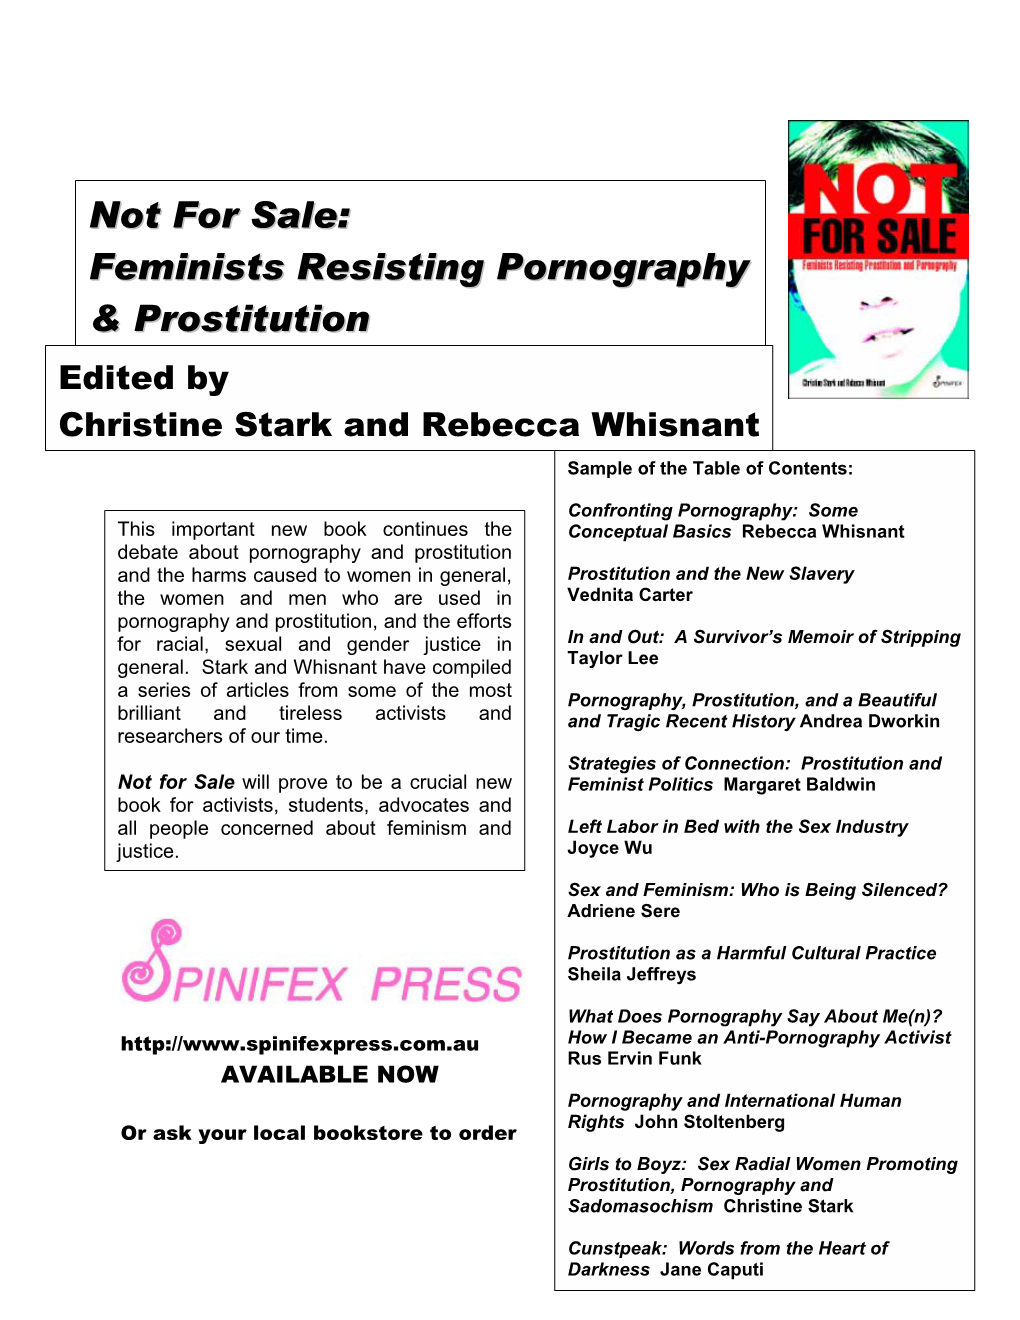 Not for Sale: Feminists Resisting Pornography & Prostitution